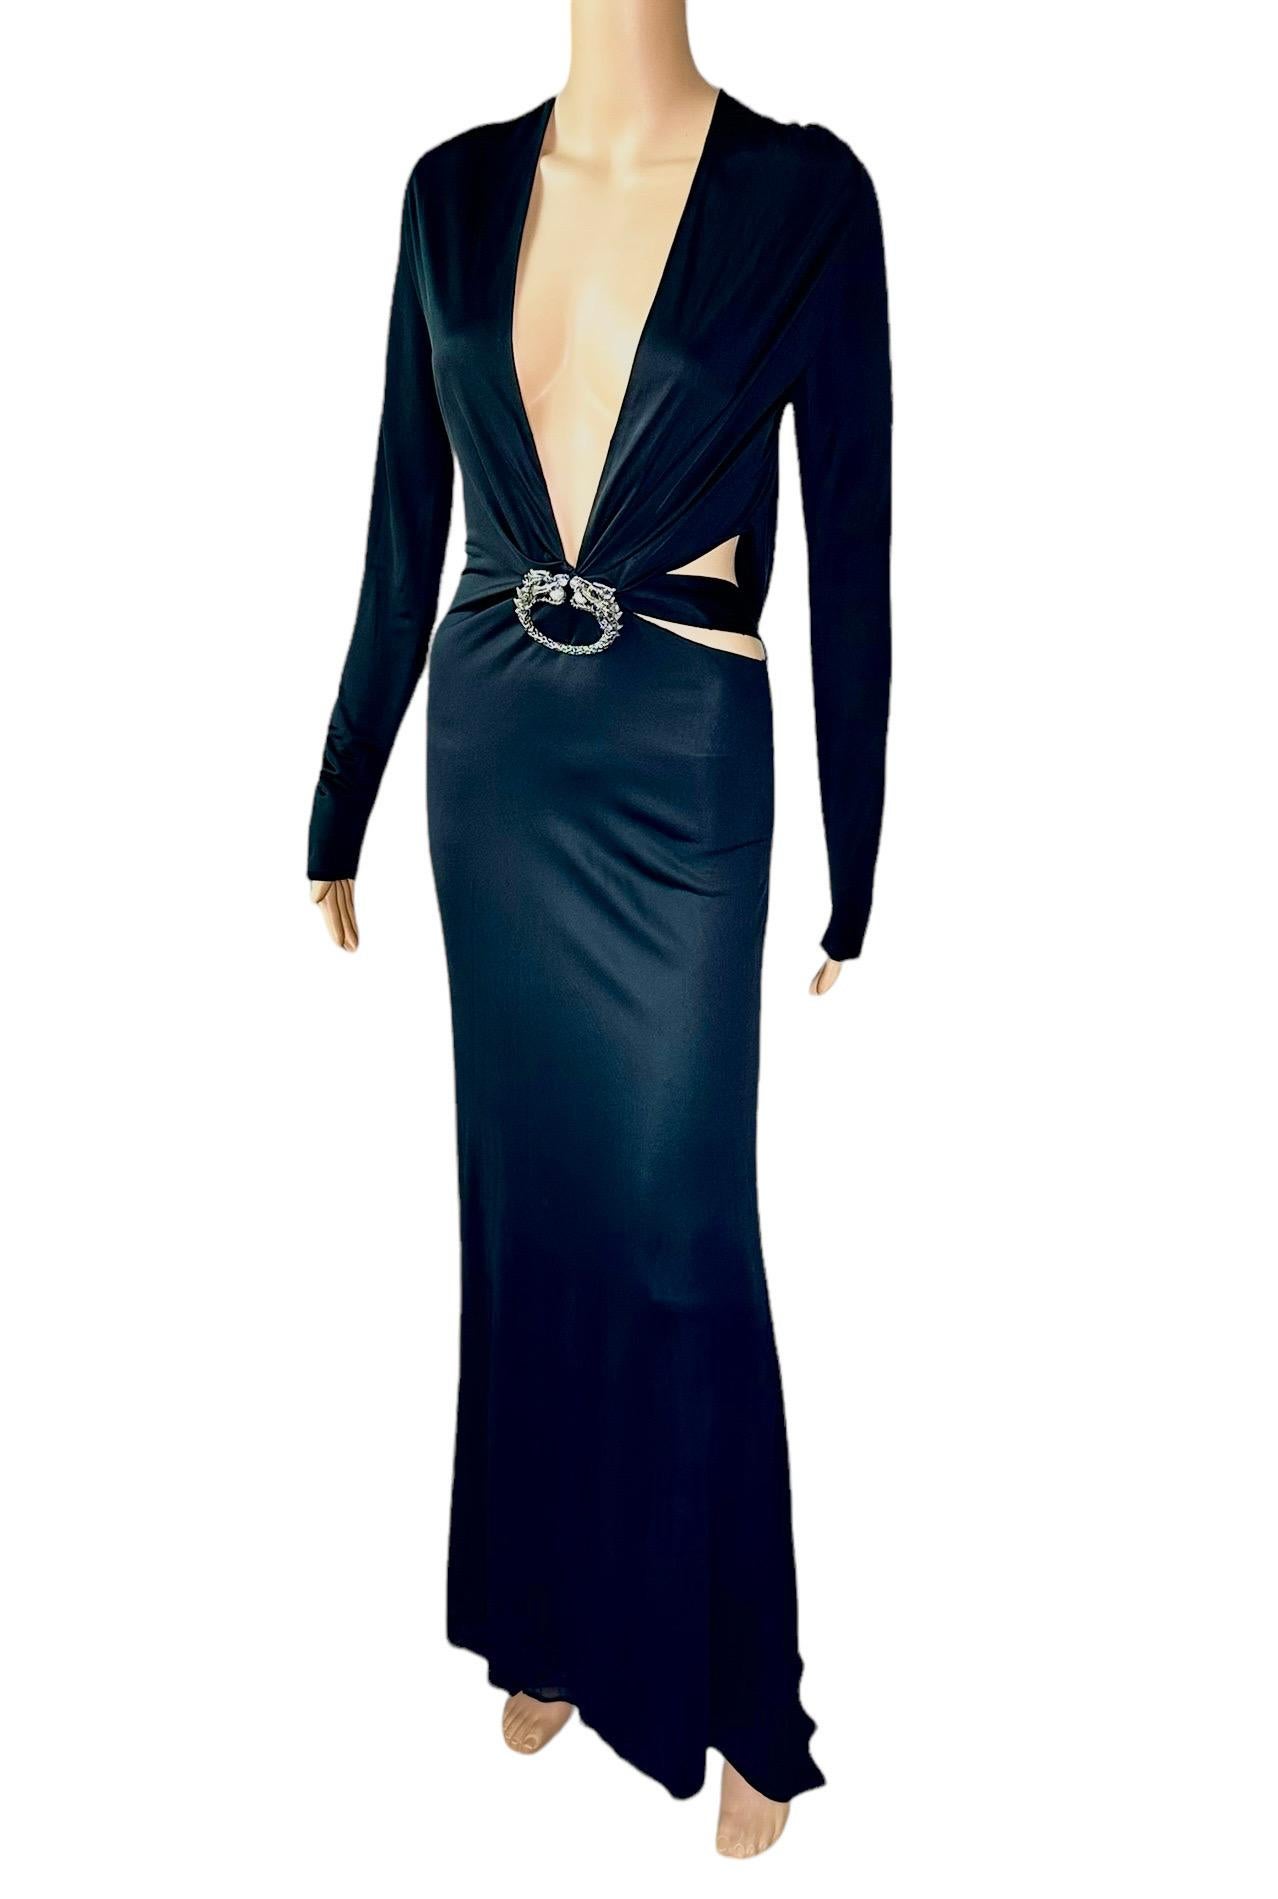 Tom Ford for Gucci F/W 2004 Embellished Plunging Cutout Black Evening Dress Gown For Sale 1